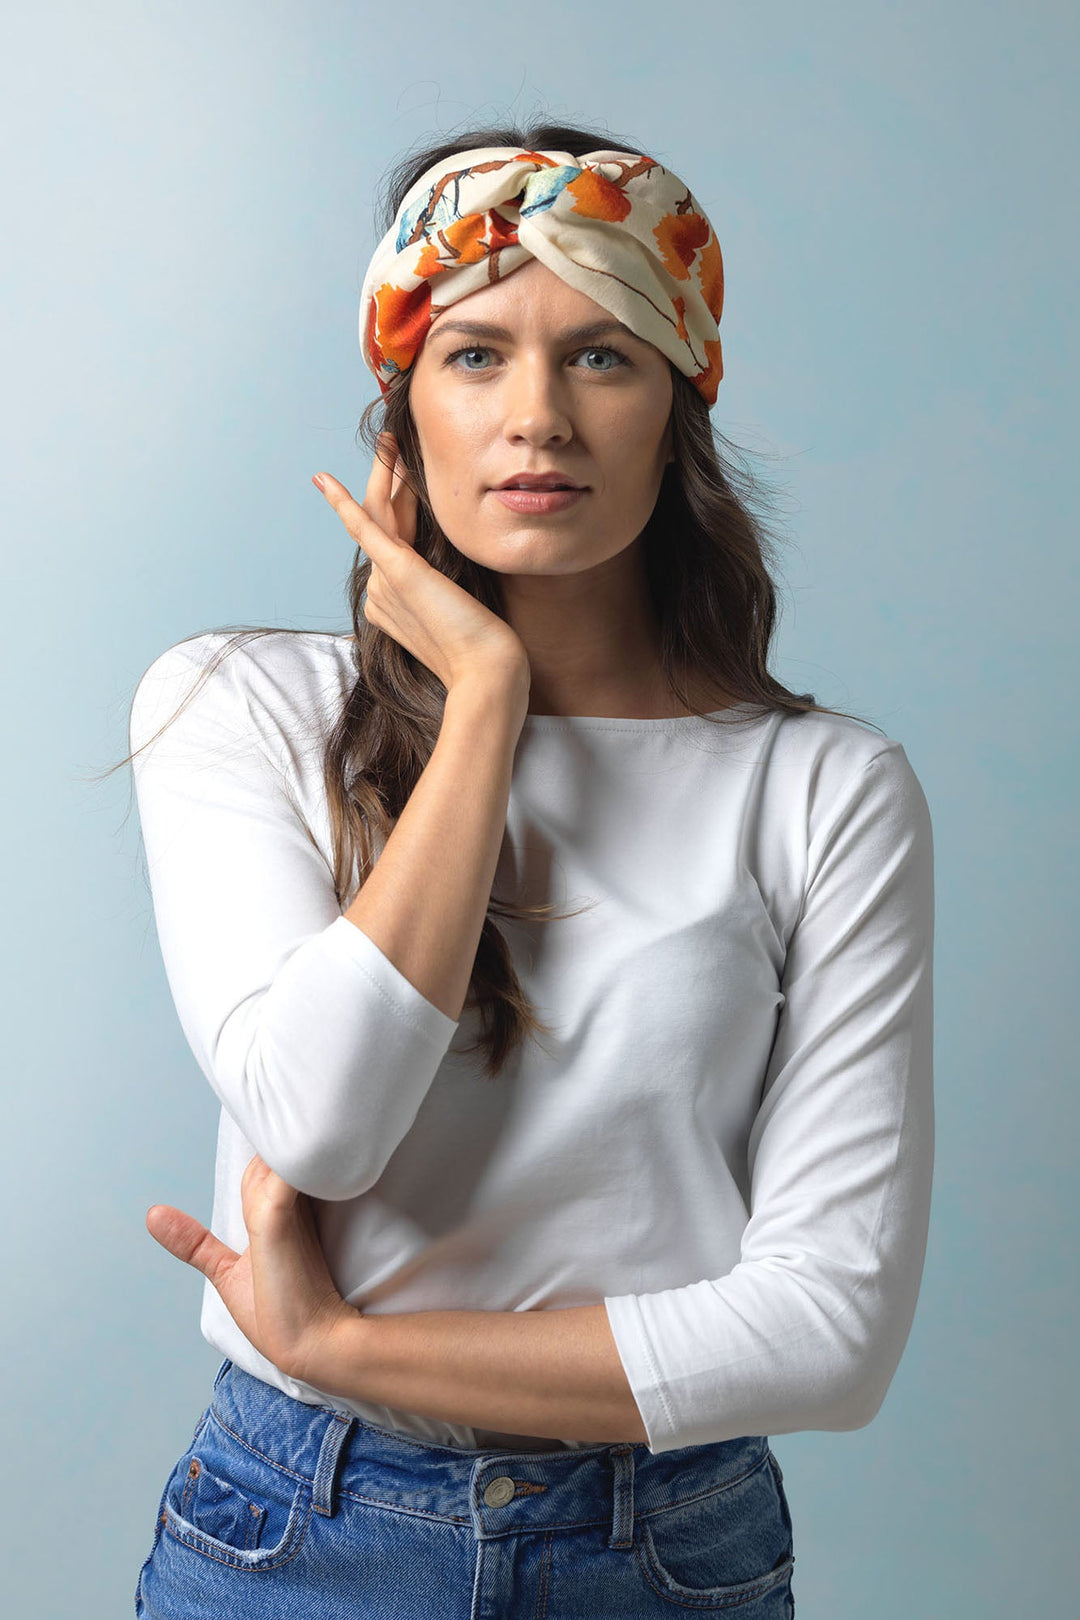 Our headbands are made from 100% recycled material using offcuts from our clothing production.